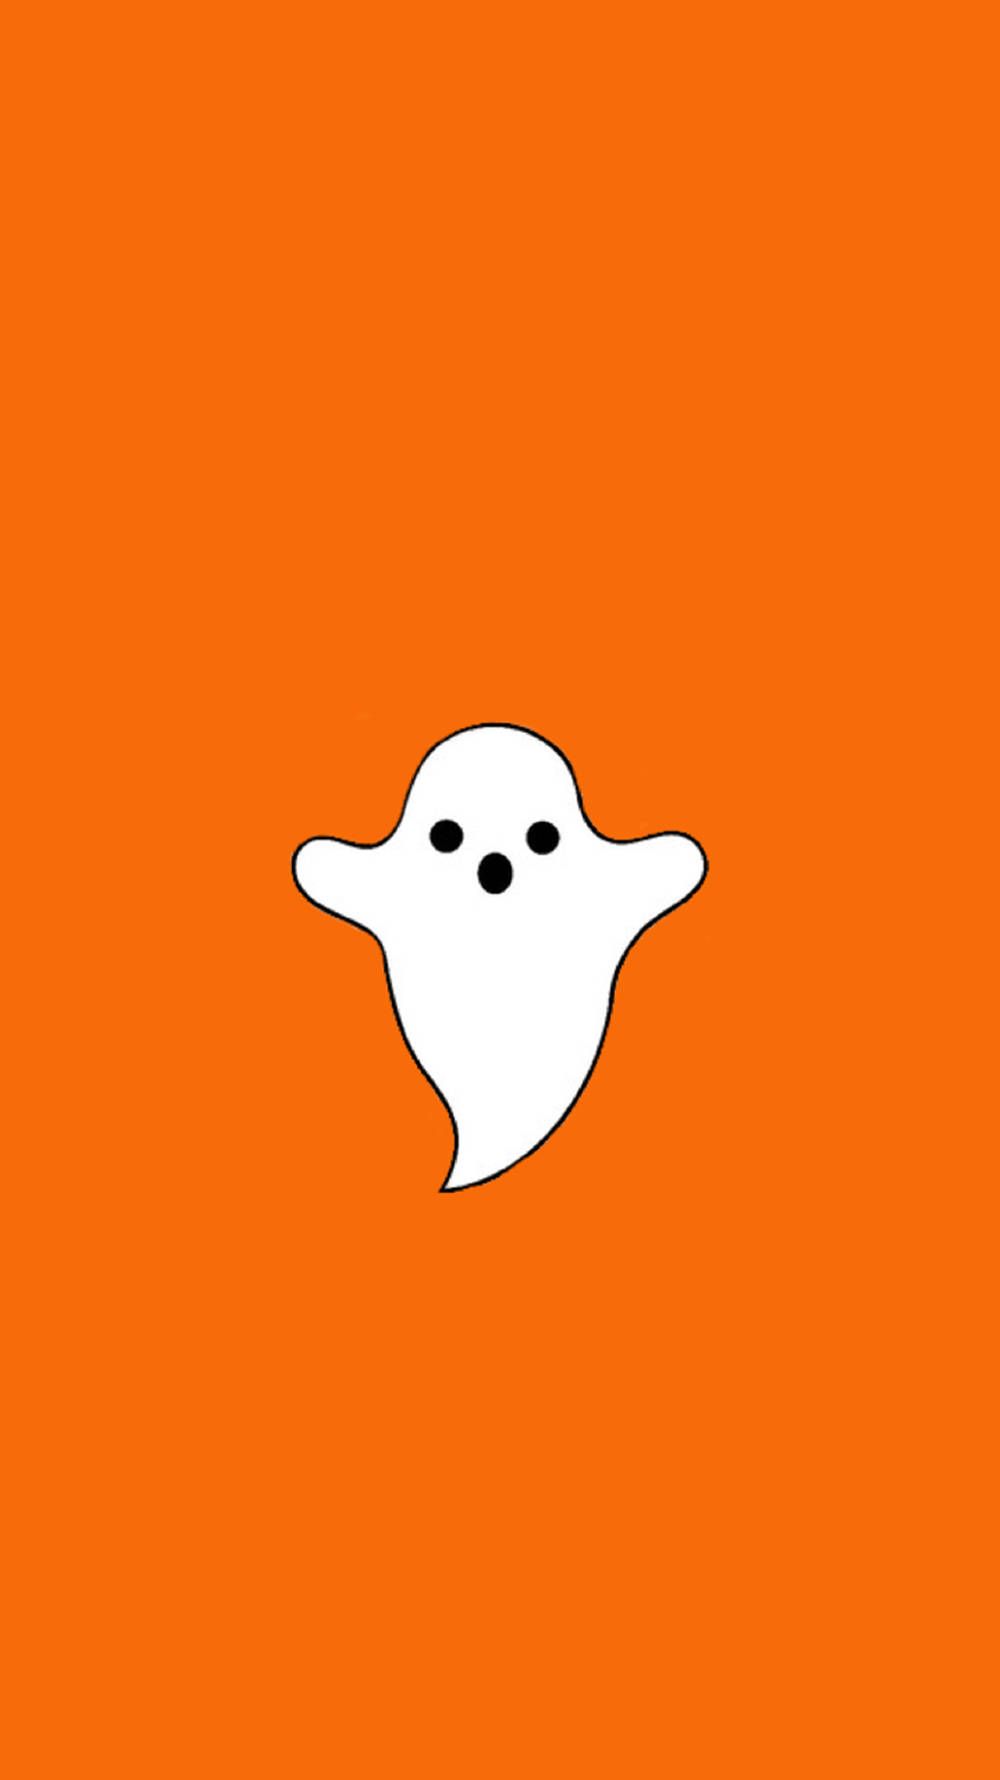 A cute ghost on an orange background - Ghost